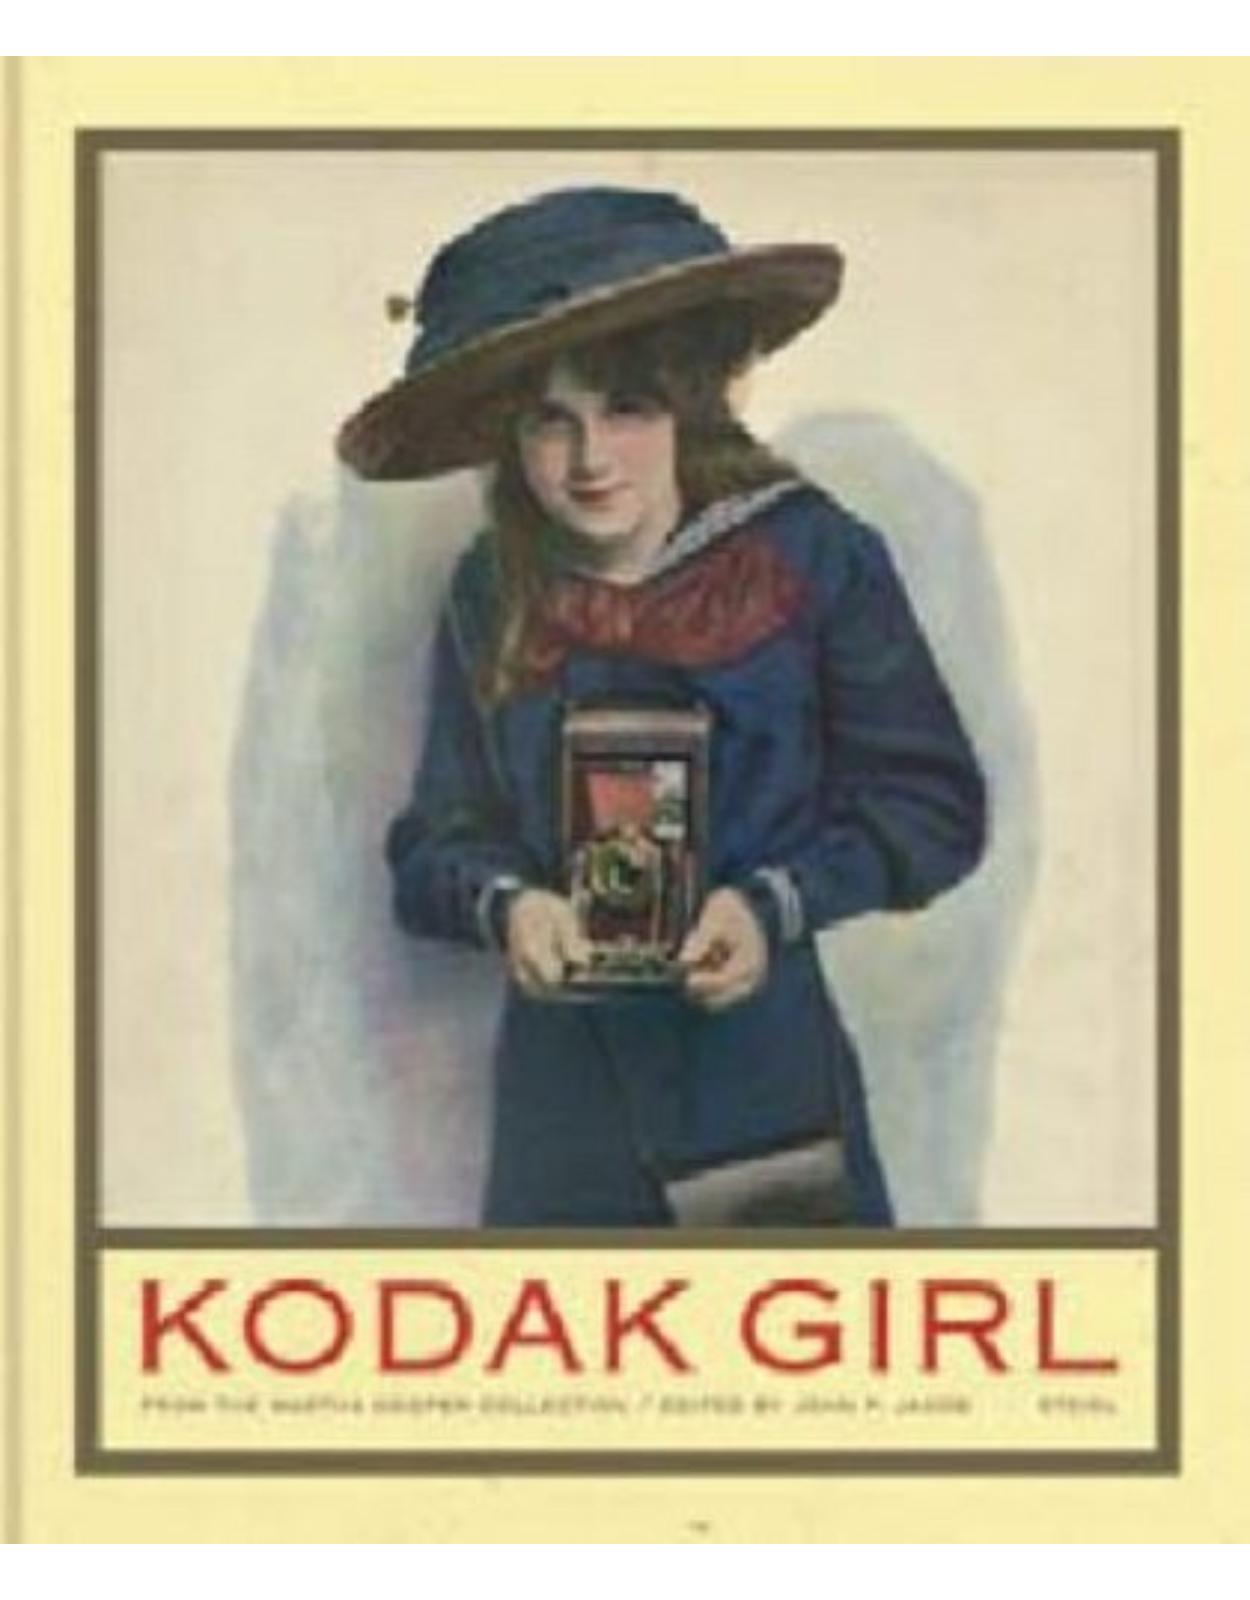 Kodak Girl: From the Martha Cooper Collection 